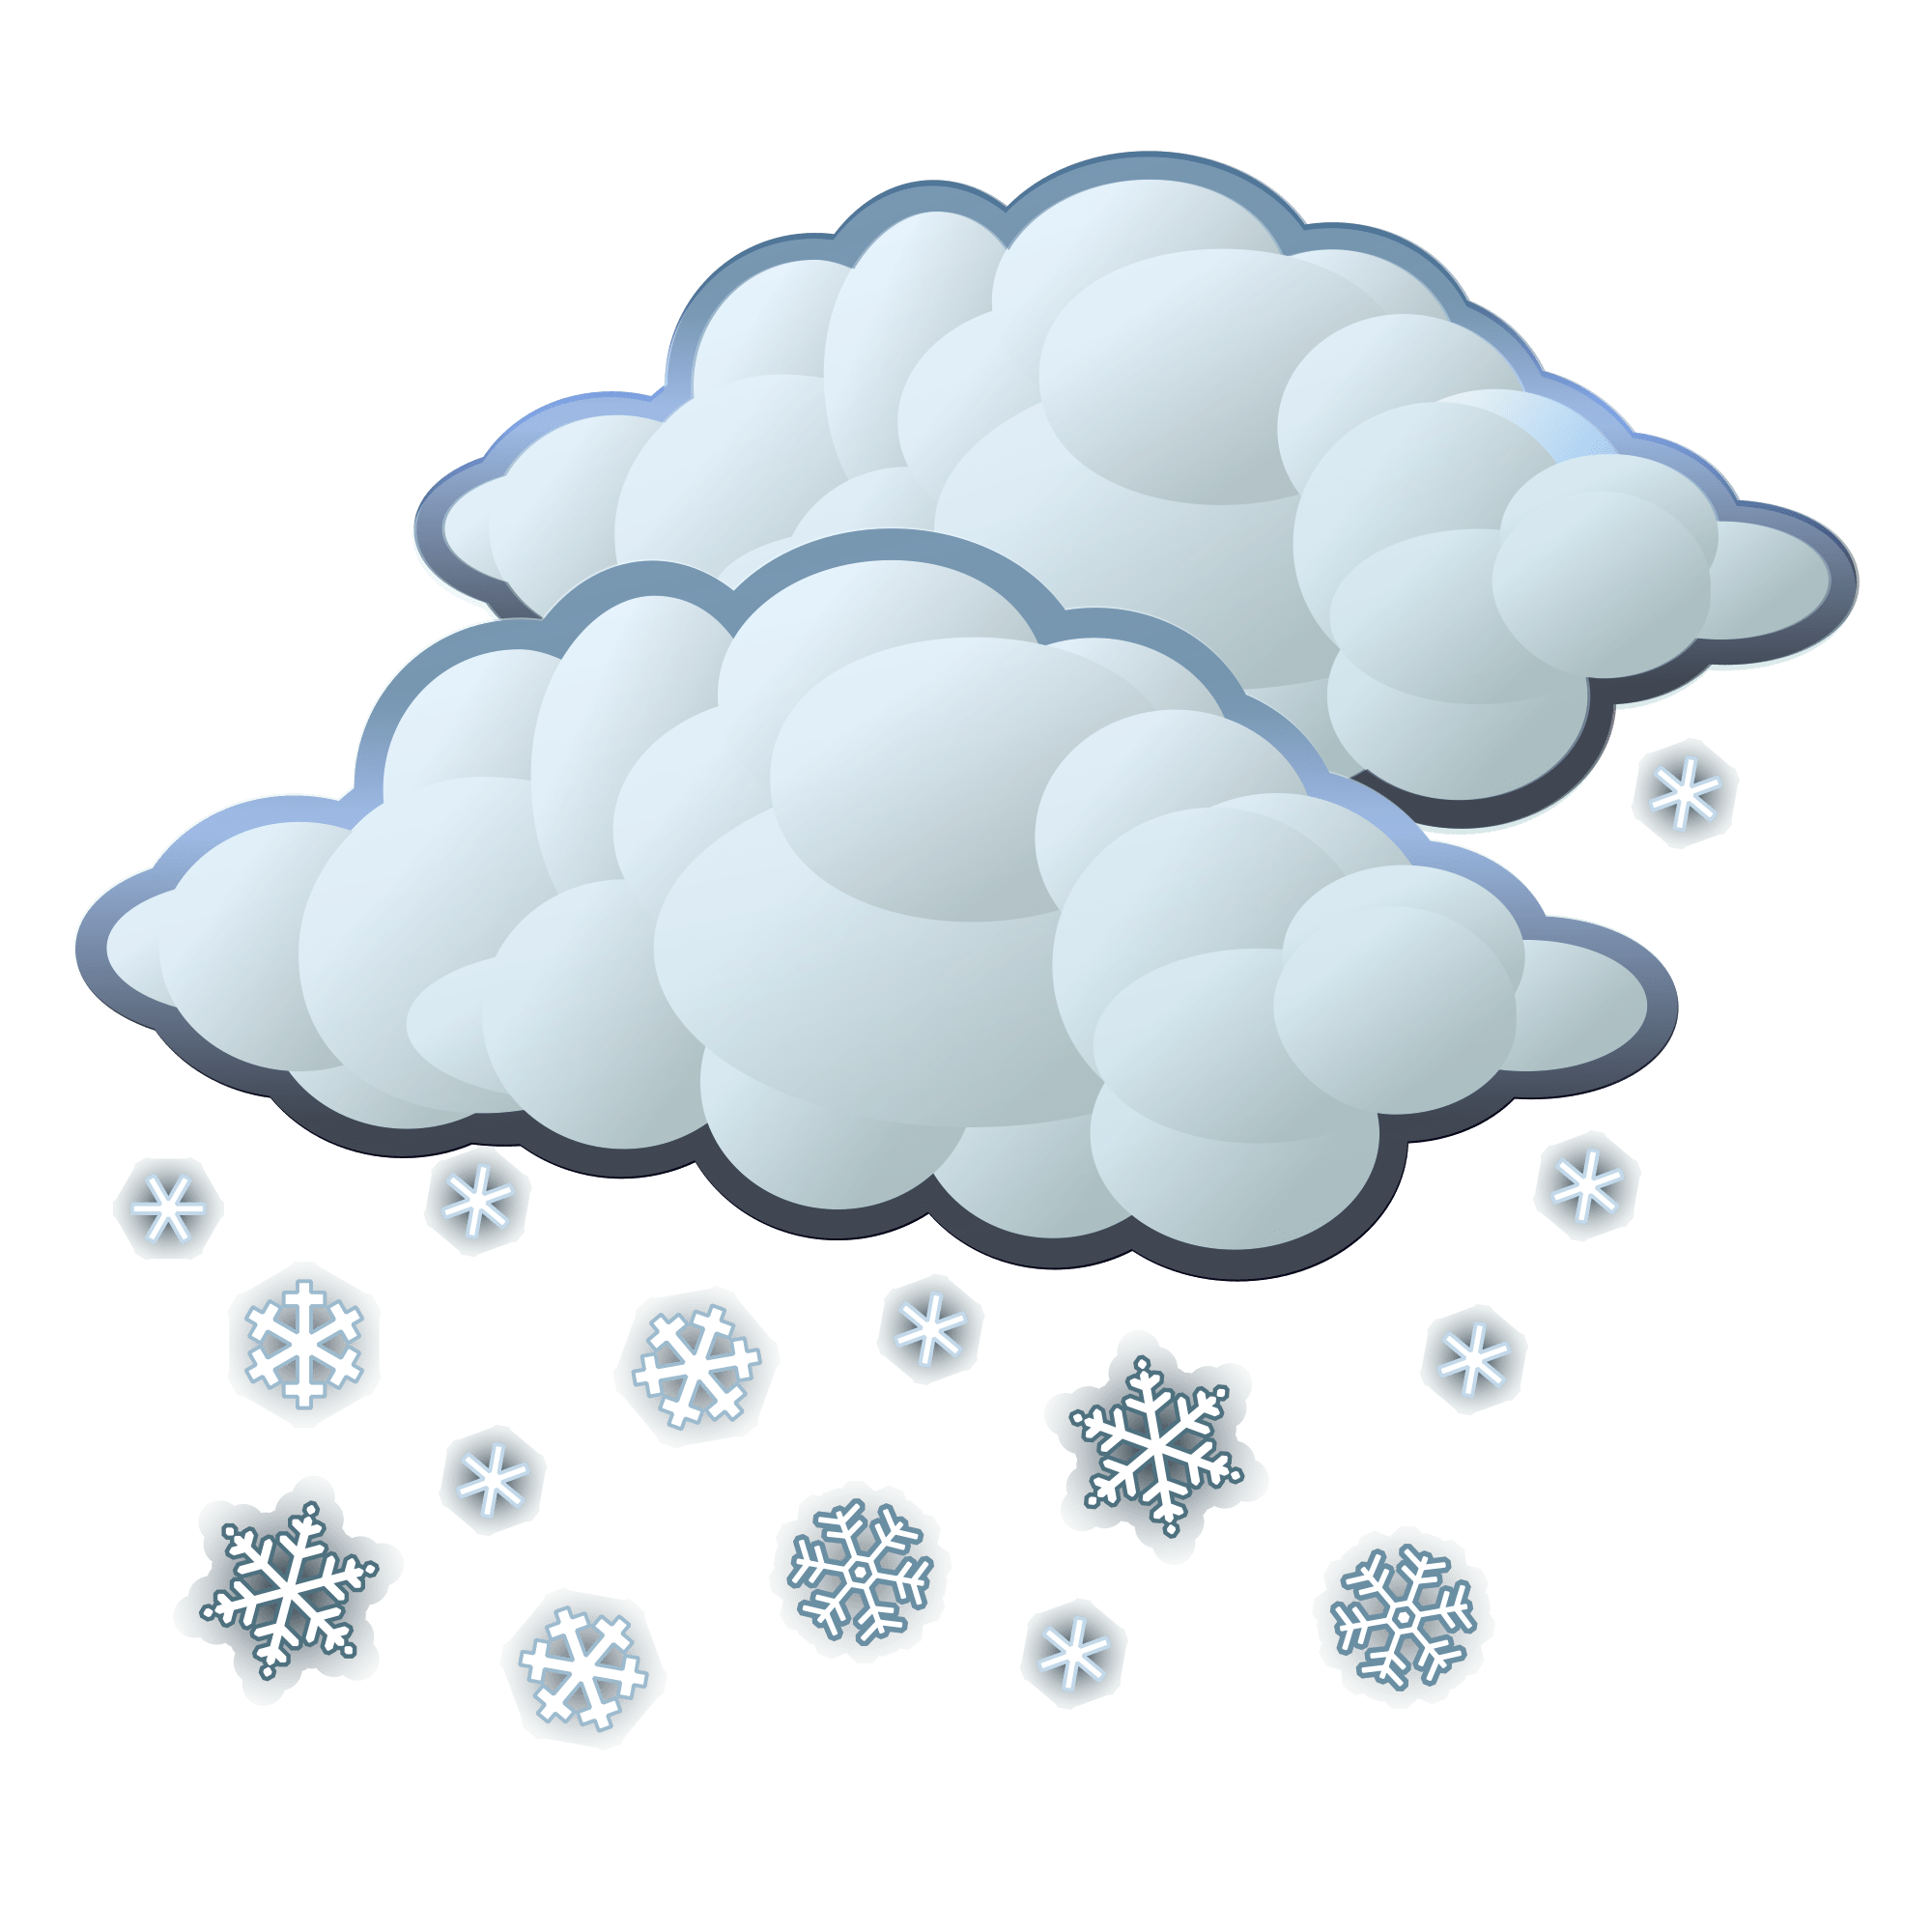 Snow Clip Art Images - Free Download on Clipart Library - Clip Art Library